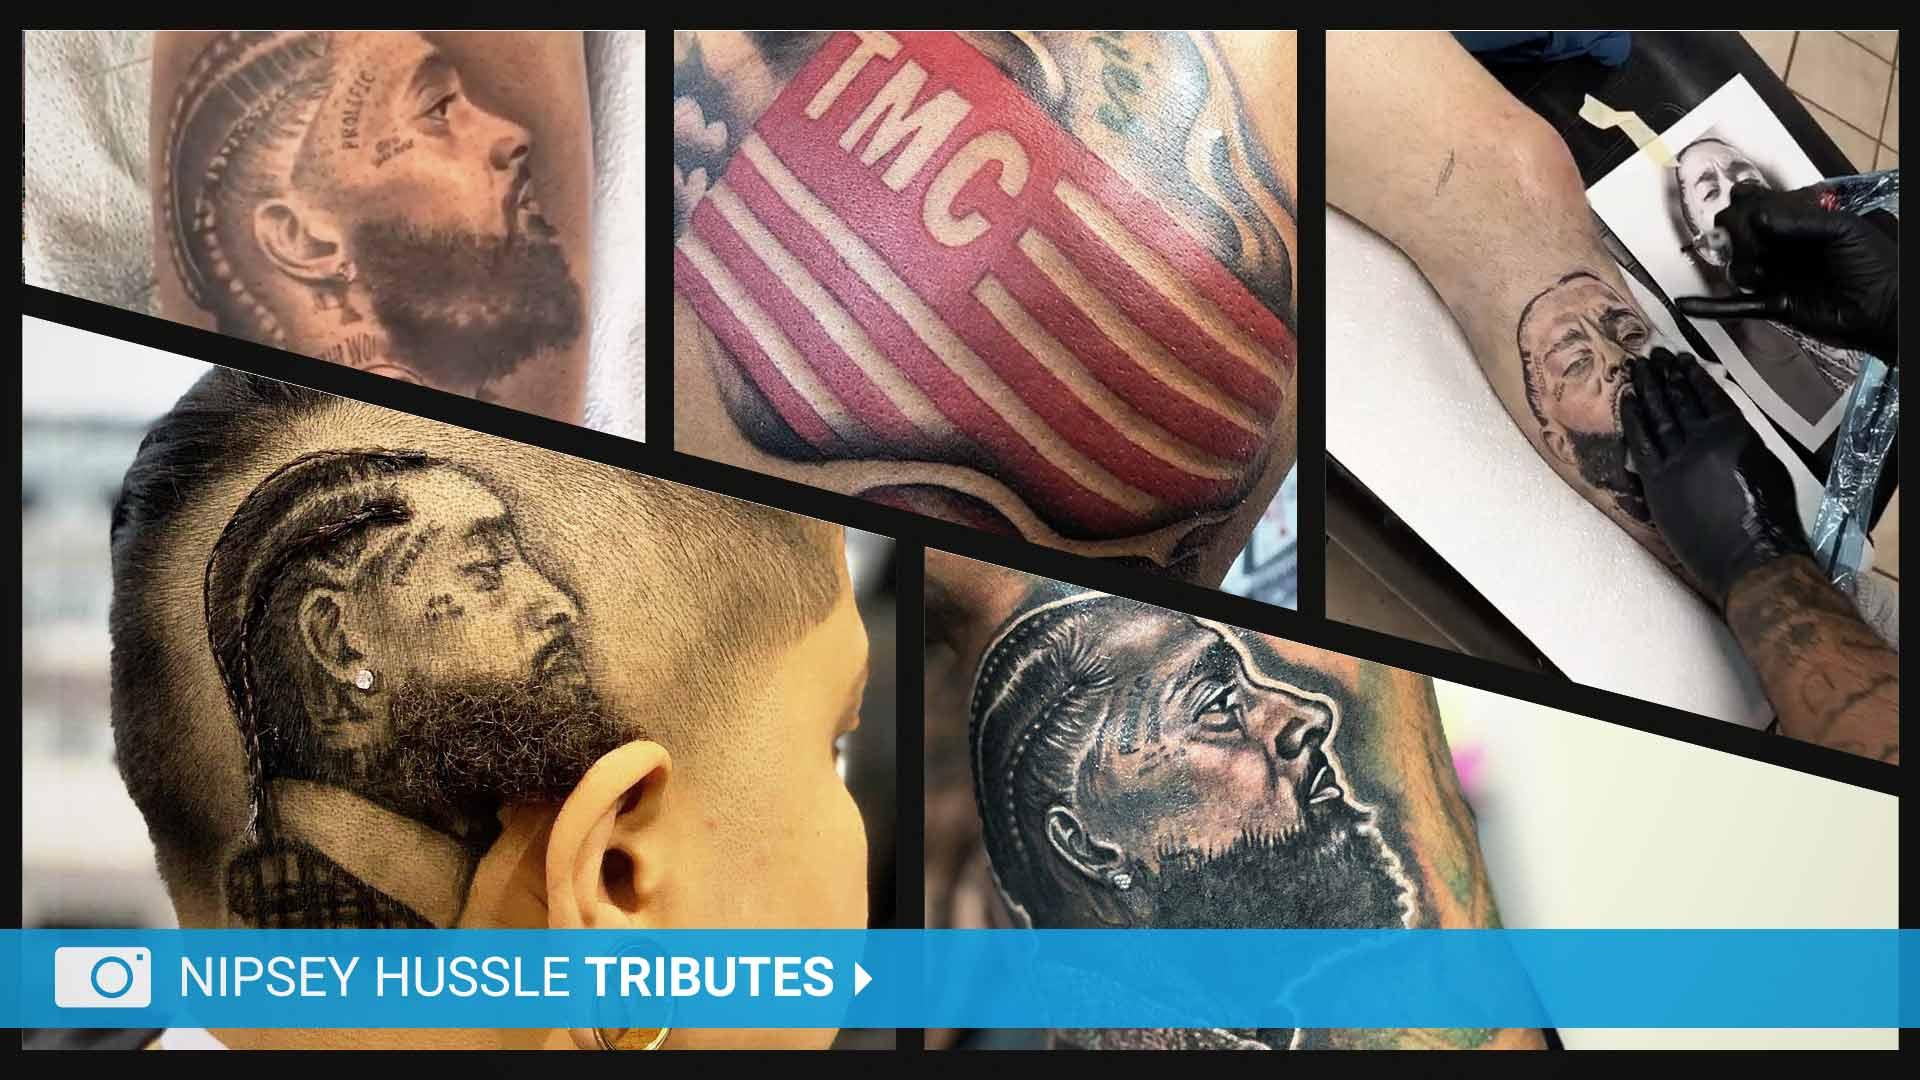 Nipsey Hussle Fans Get Tattoos & Haircuts to Honor Slain Rapper